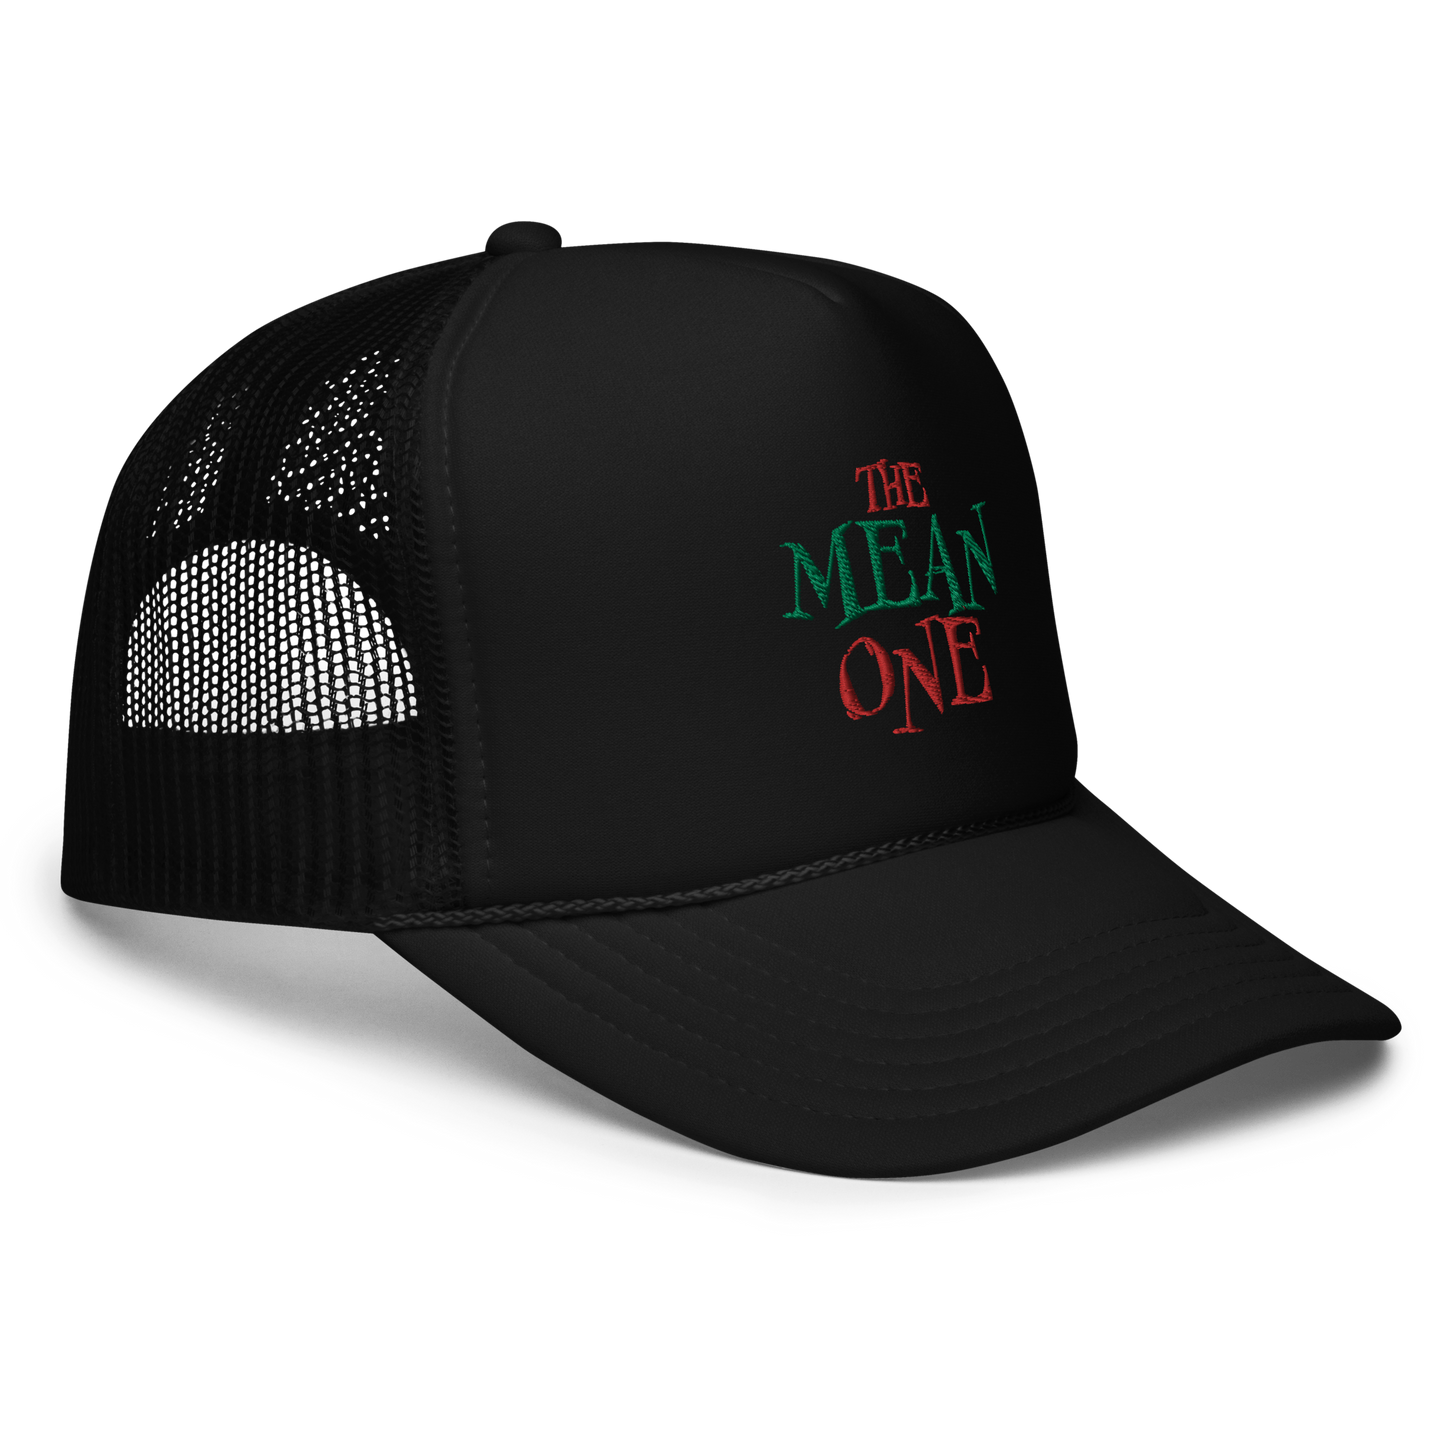 The Mean One - Trucker Hat